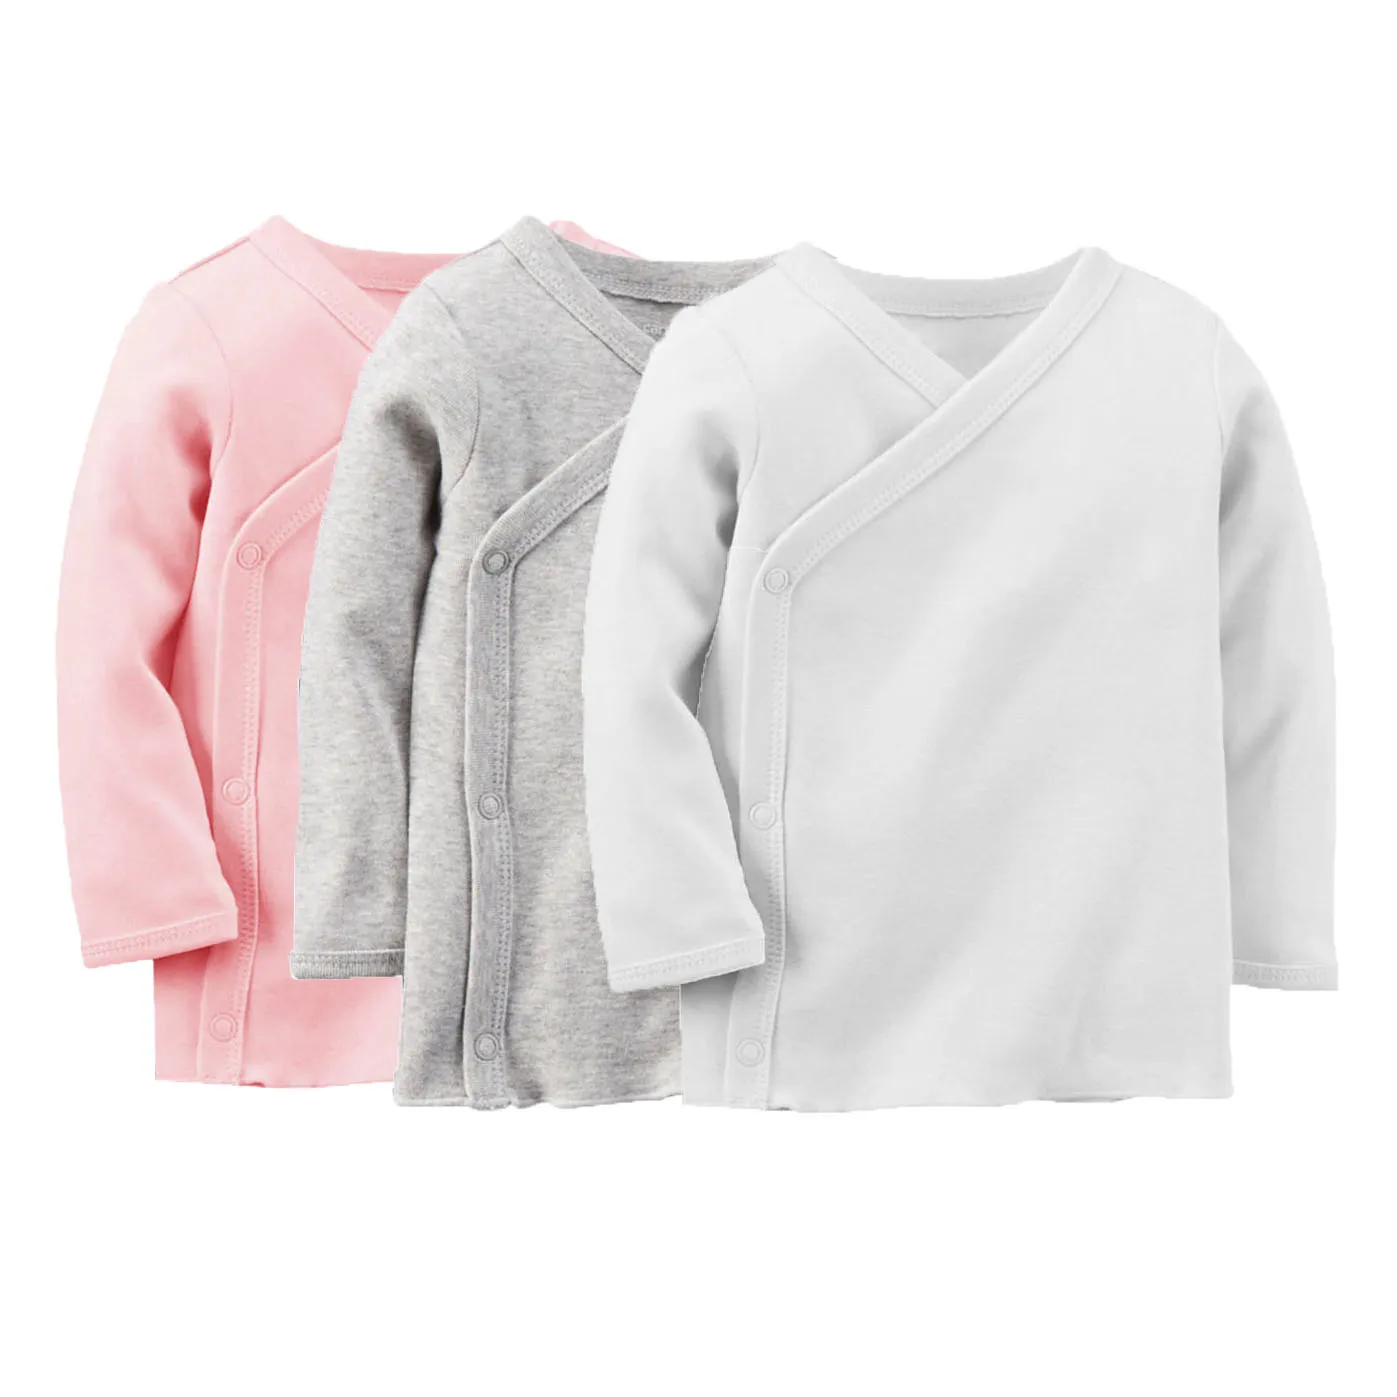 3 Pack Long Sleeve Side Snap Bodysuit Infant-And-Toddler-t-Shirt-Sets Has Less Than $100 of Retail/3P Ops in Softlines GLs in T52W Amazon Moda Neonati Abbigliamento Completi Set Pacco da 3 3 Mesi Medium Pink 